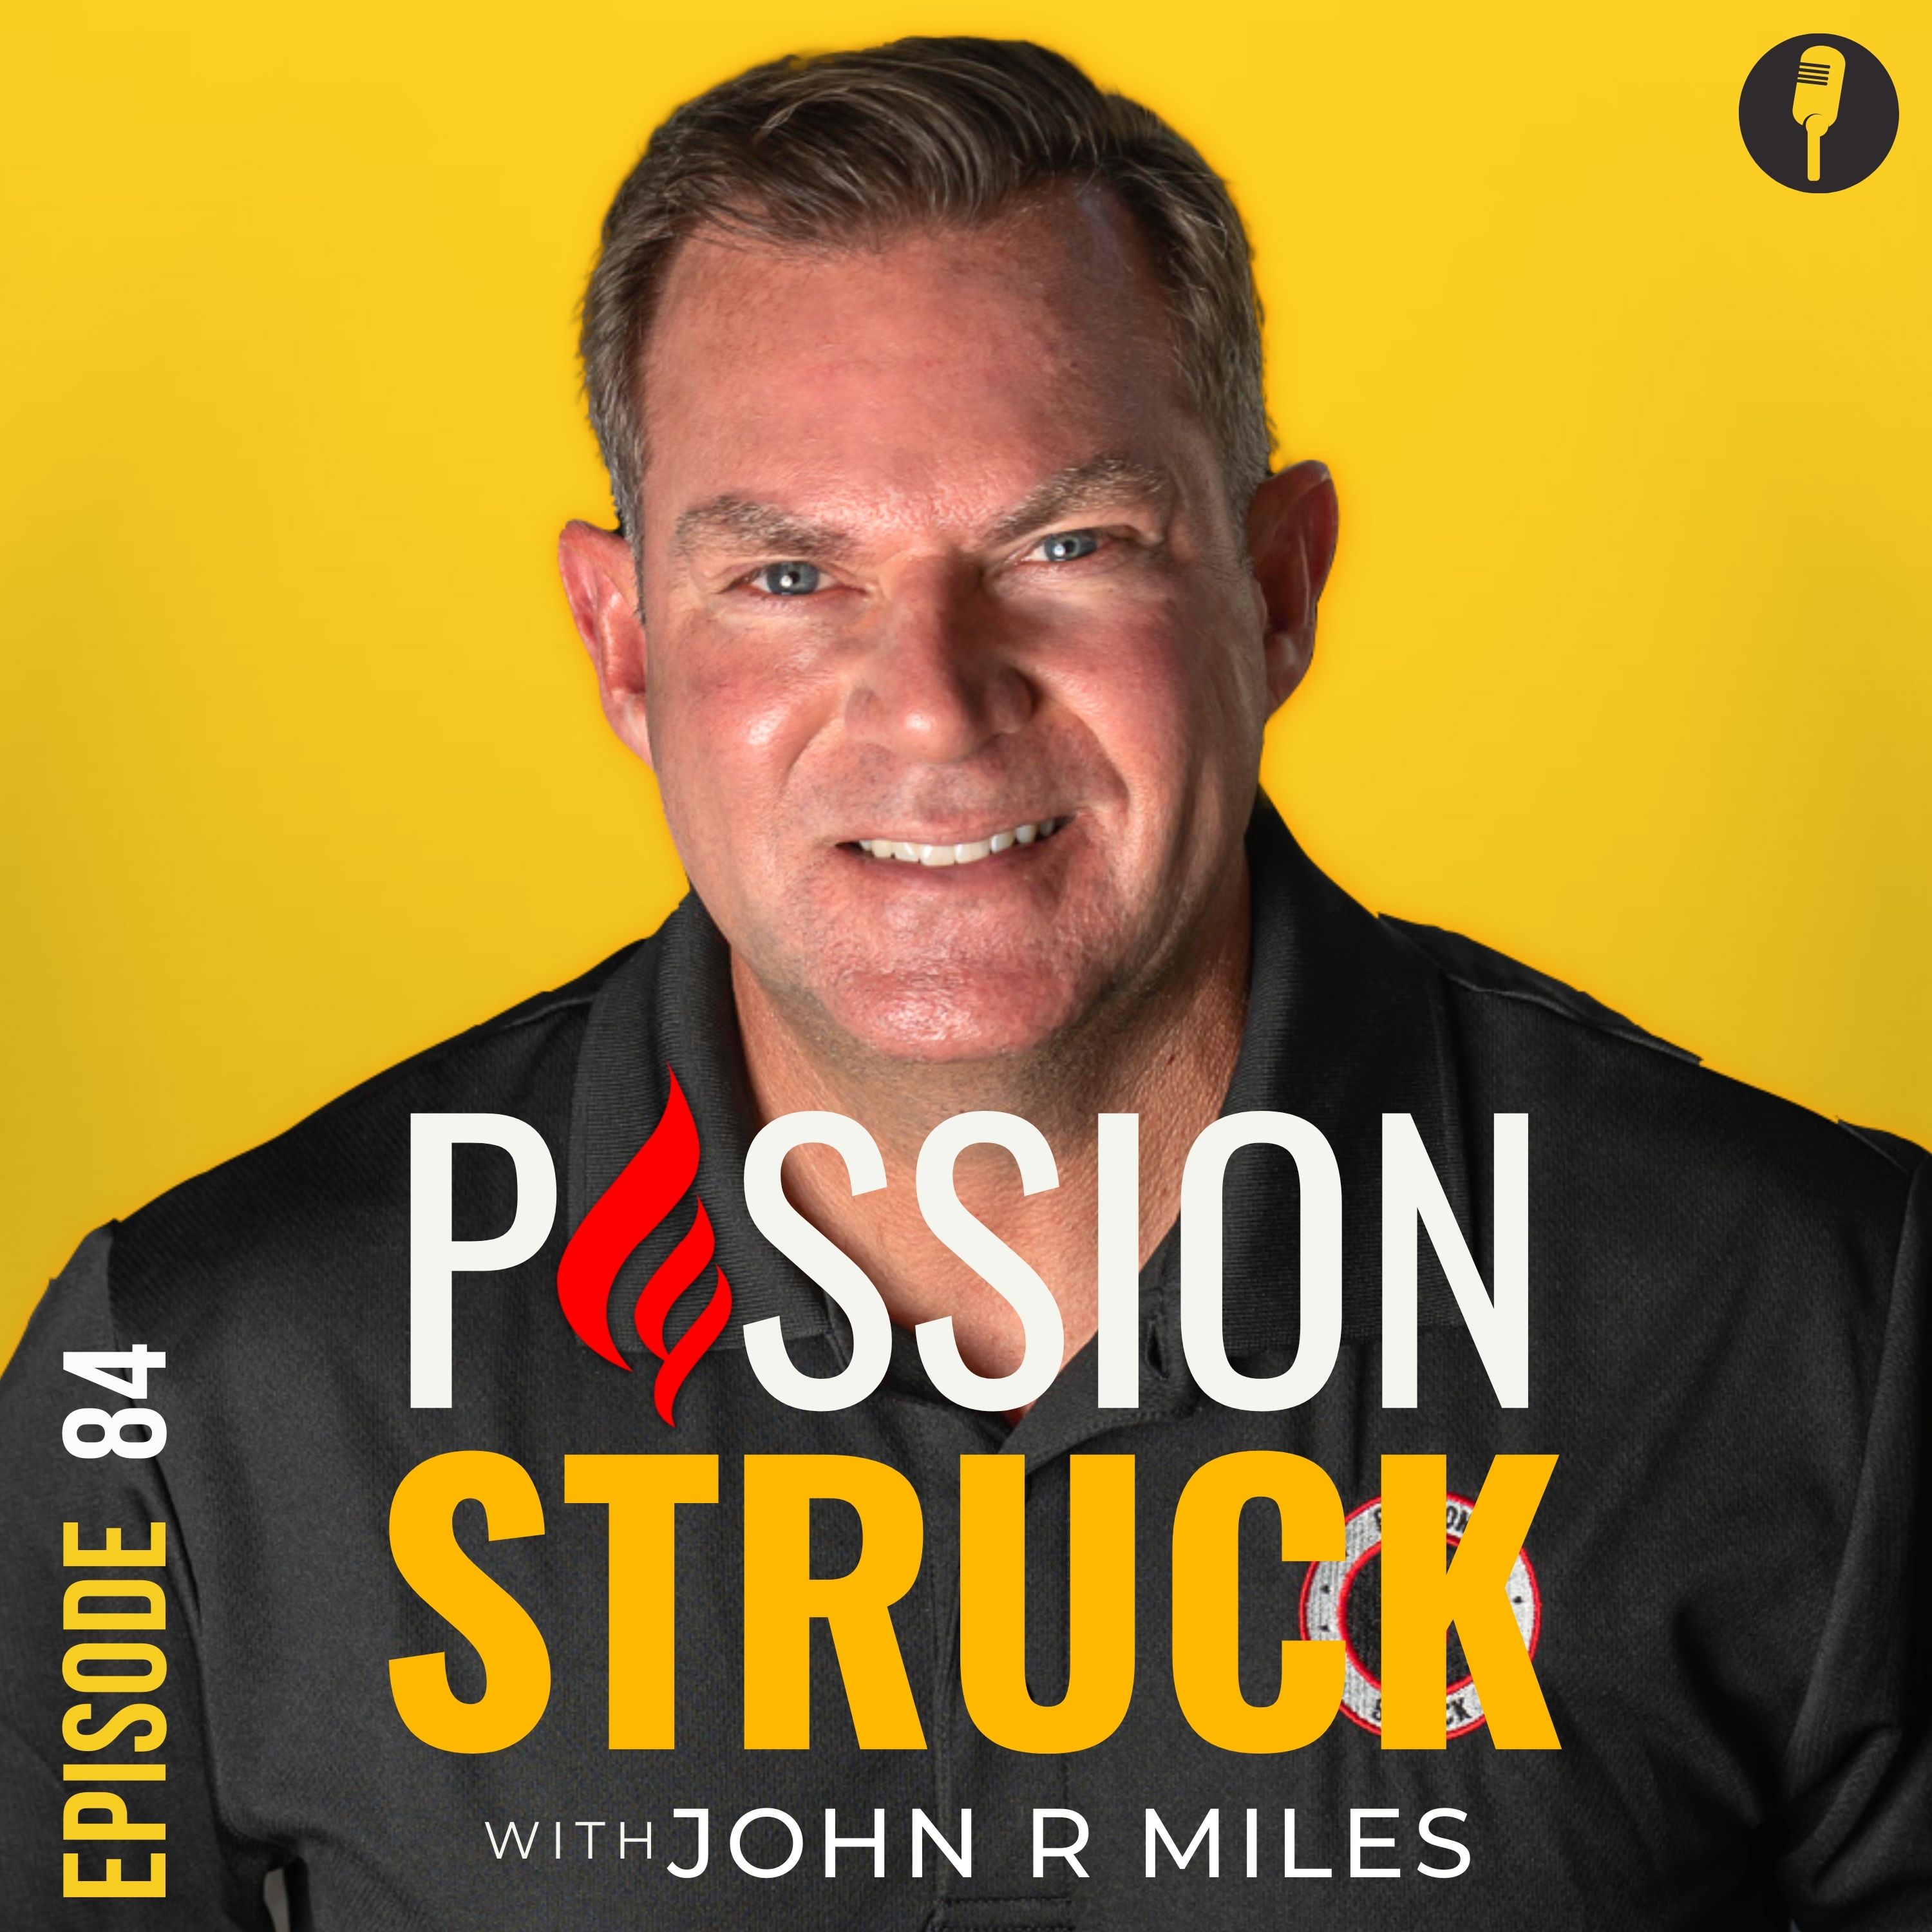 Passion Struck podcast album cover for episode 84 with John R. Miles on high achievers